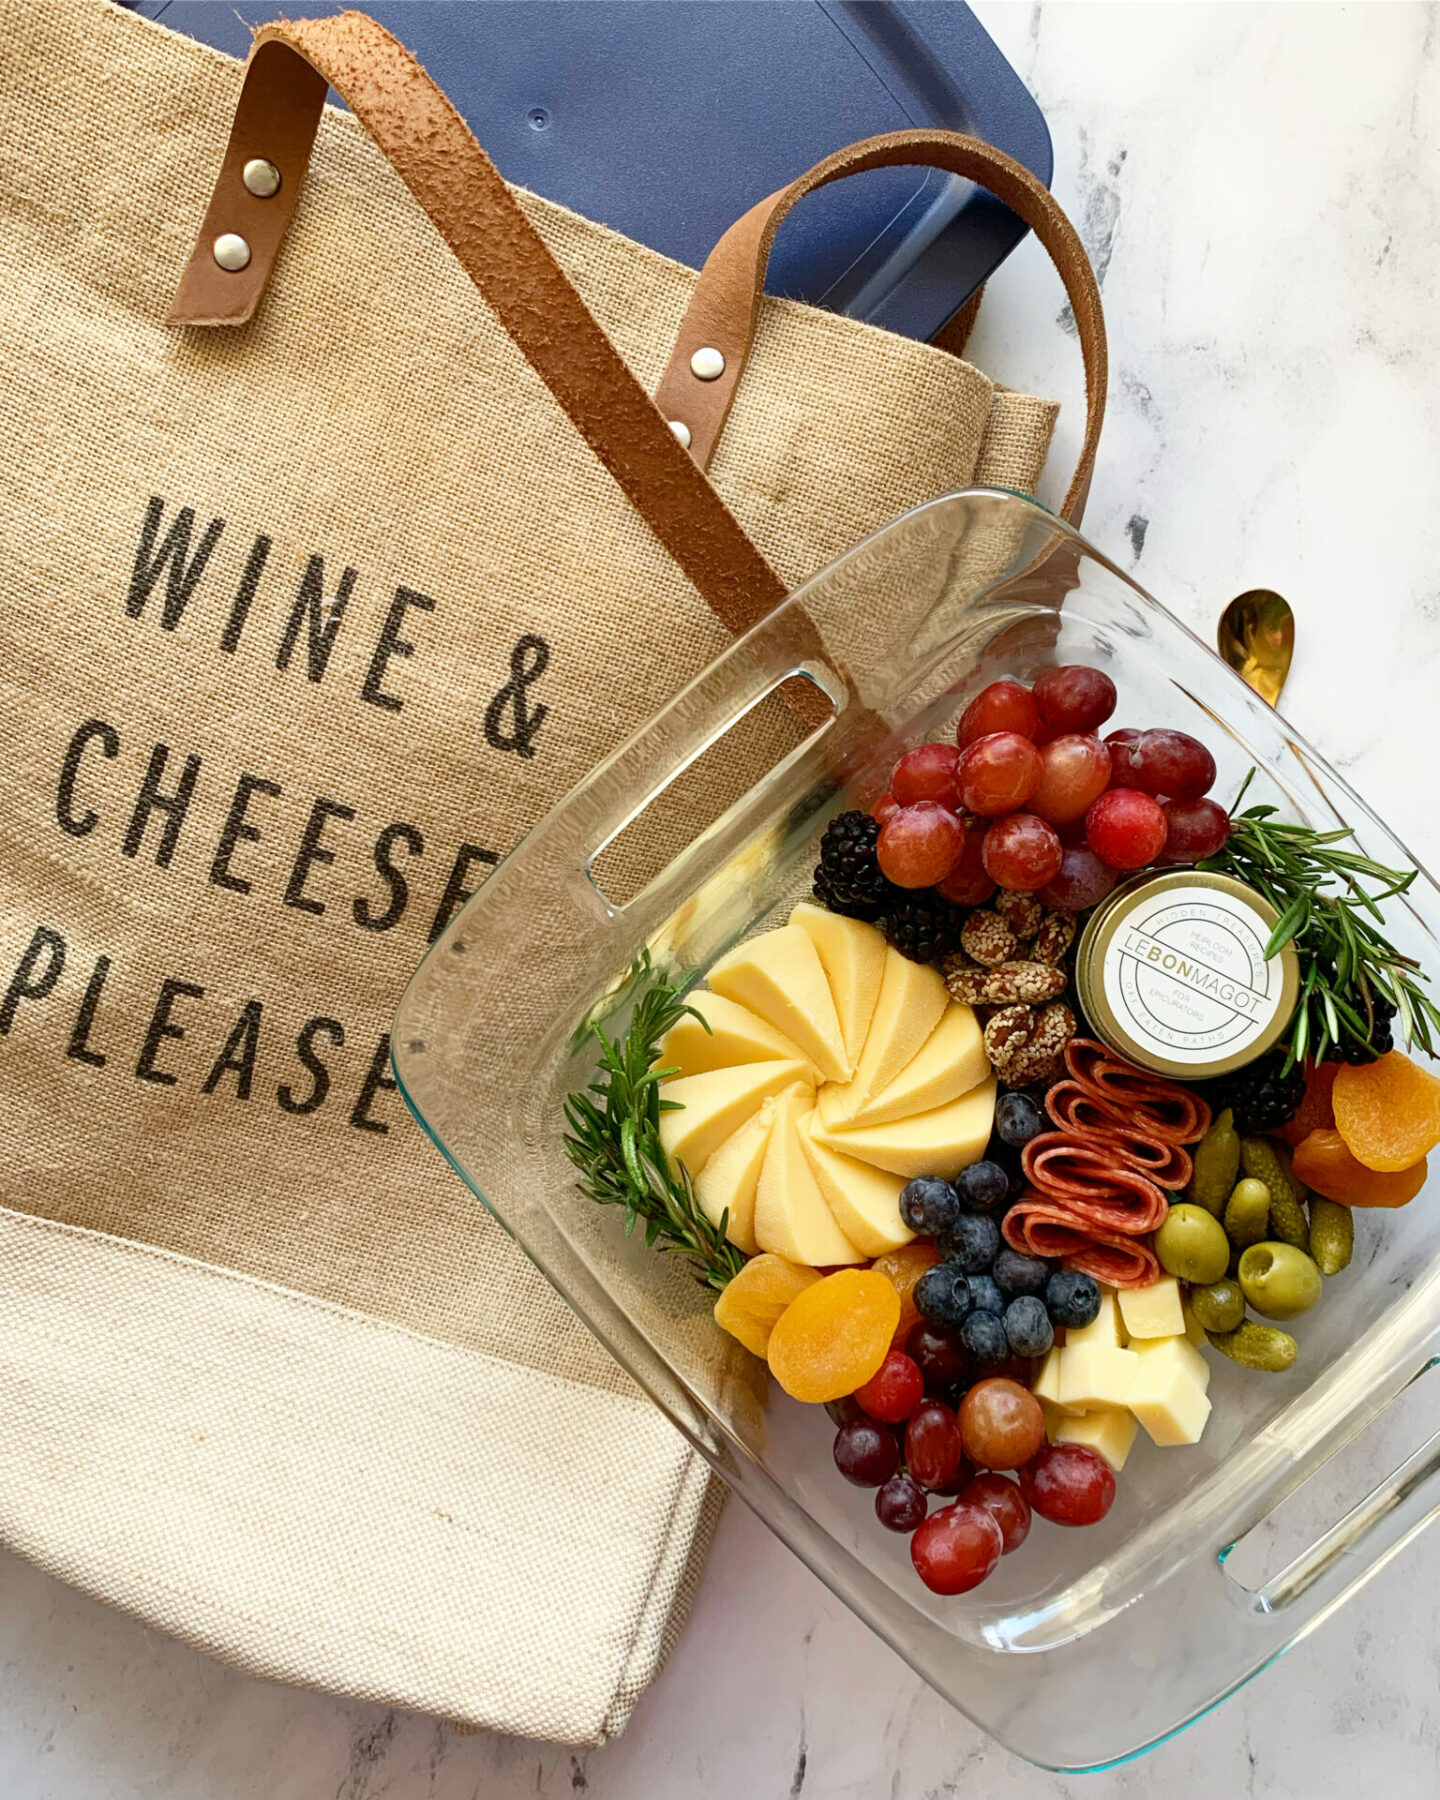 Charcuterie box with a wine & cheese bag